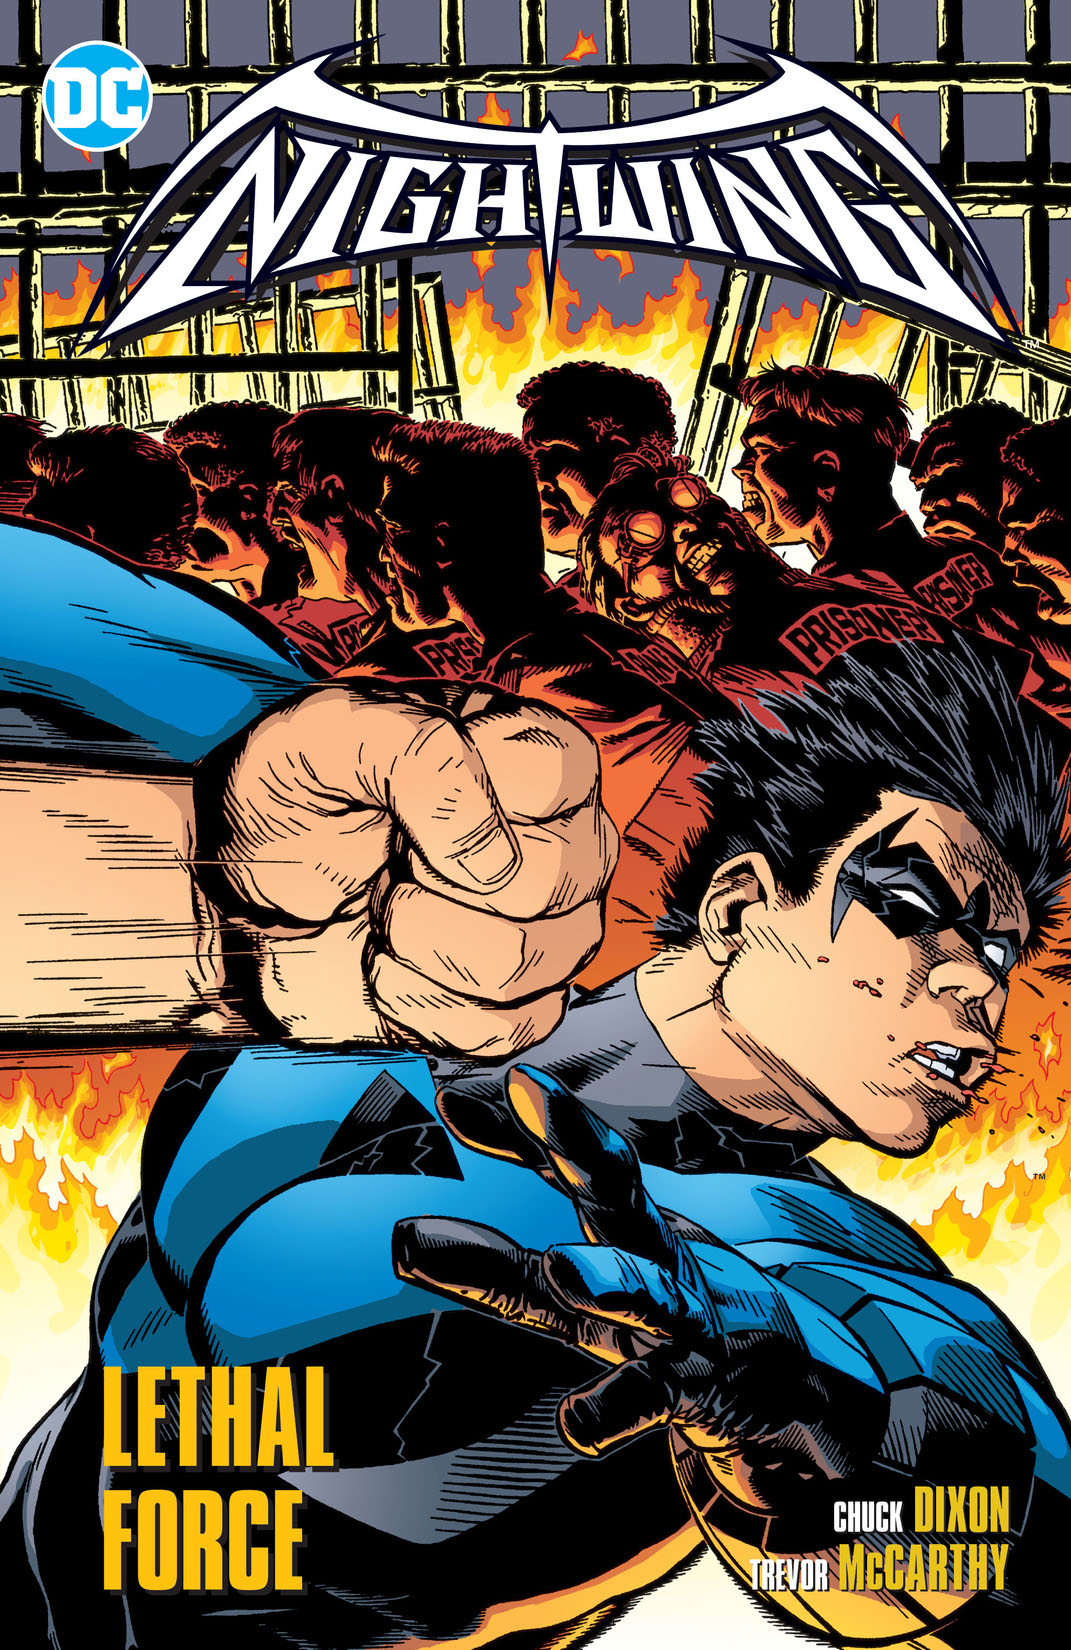 Nightwing Vol. 8: Lethal Force preview images